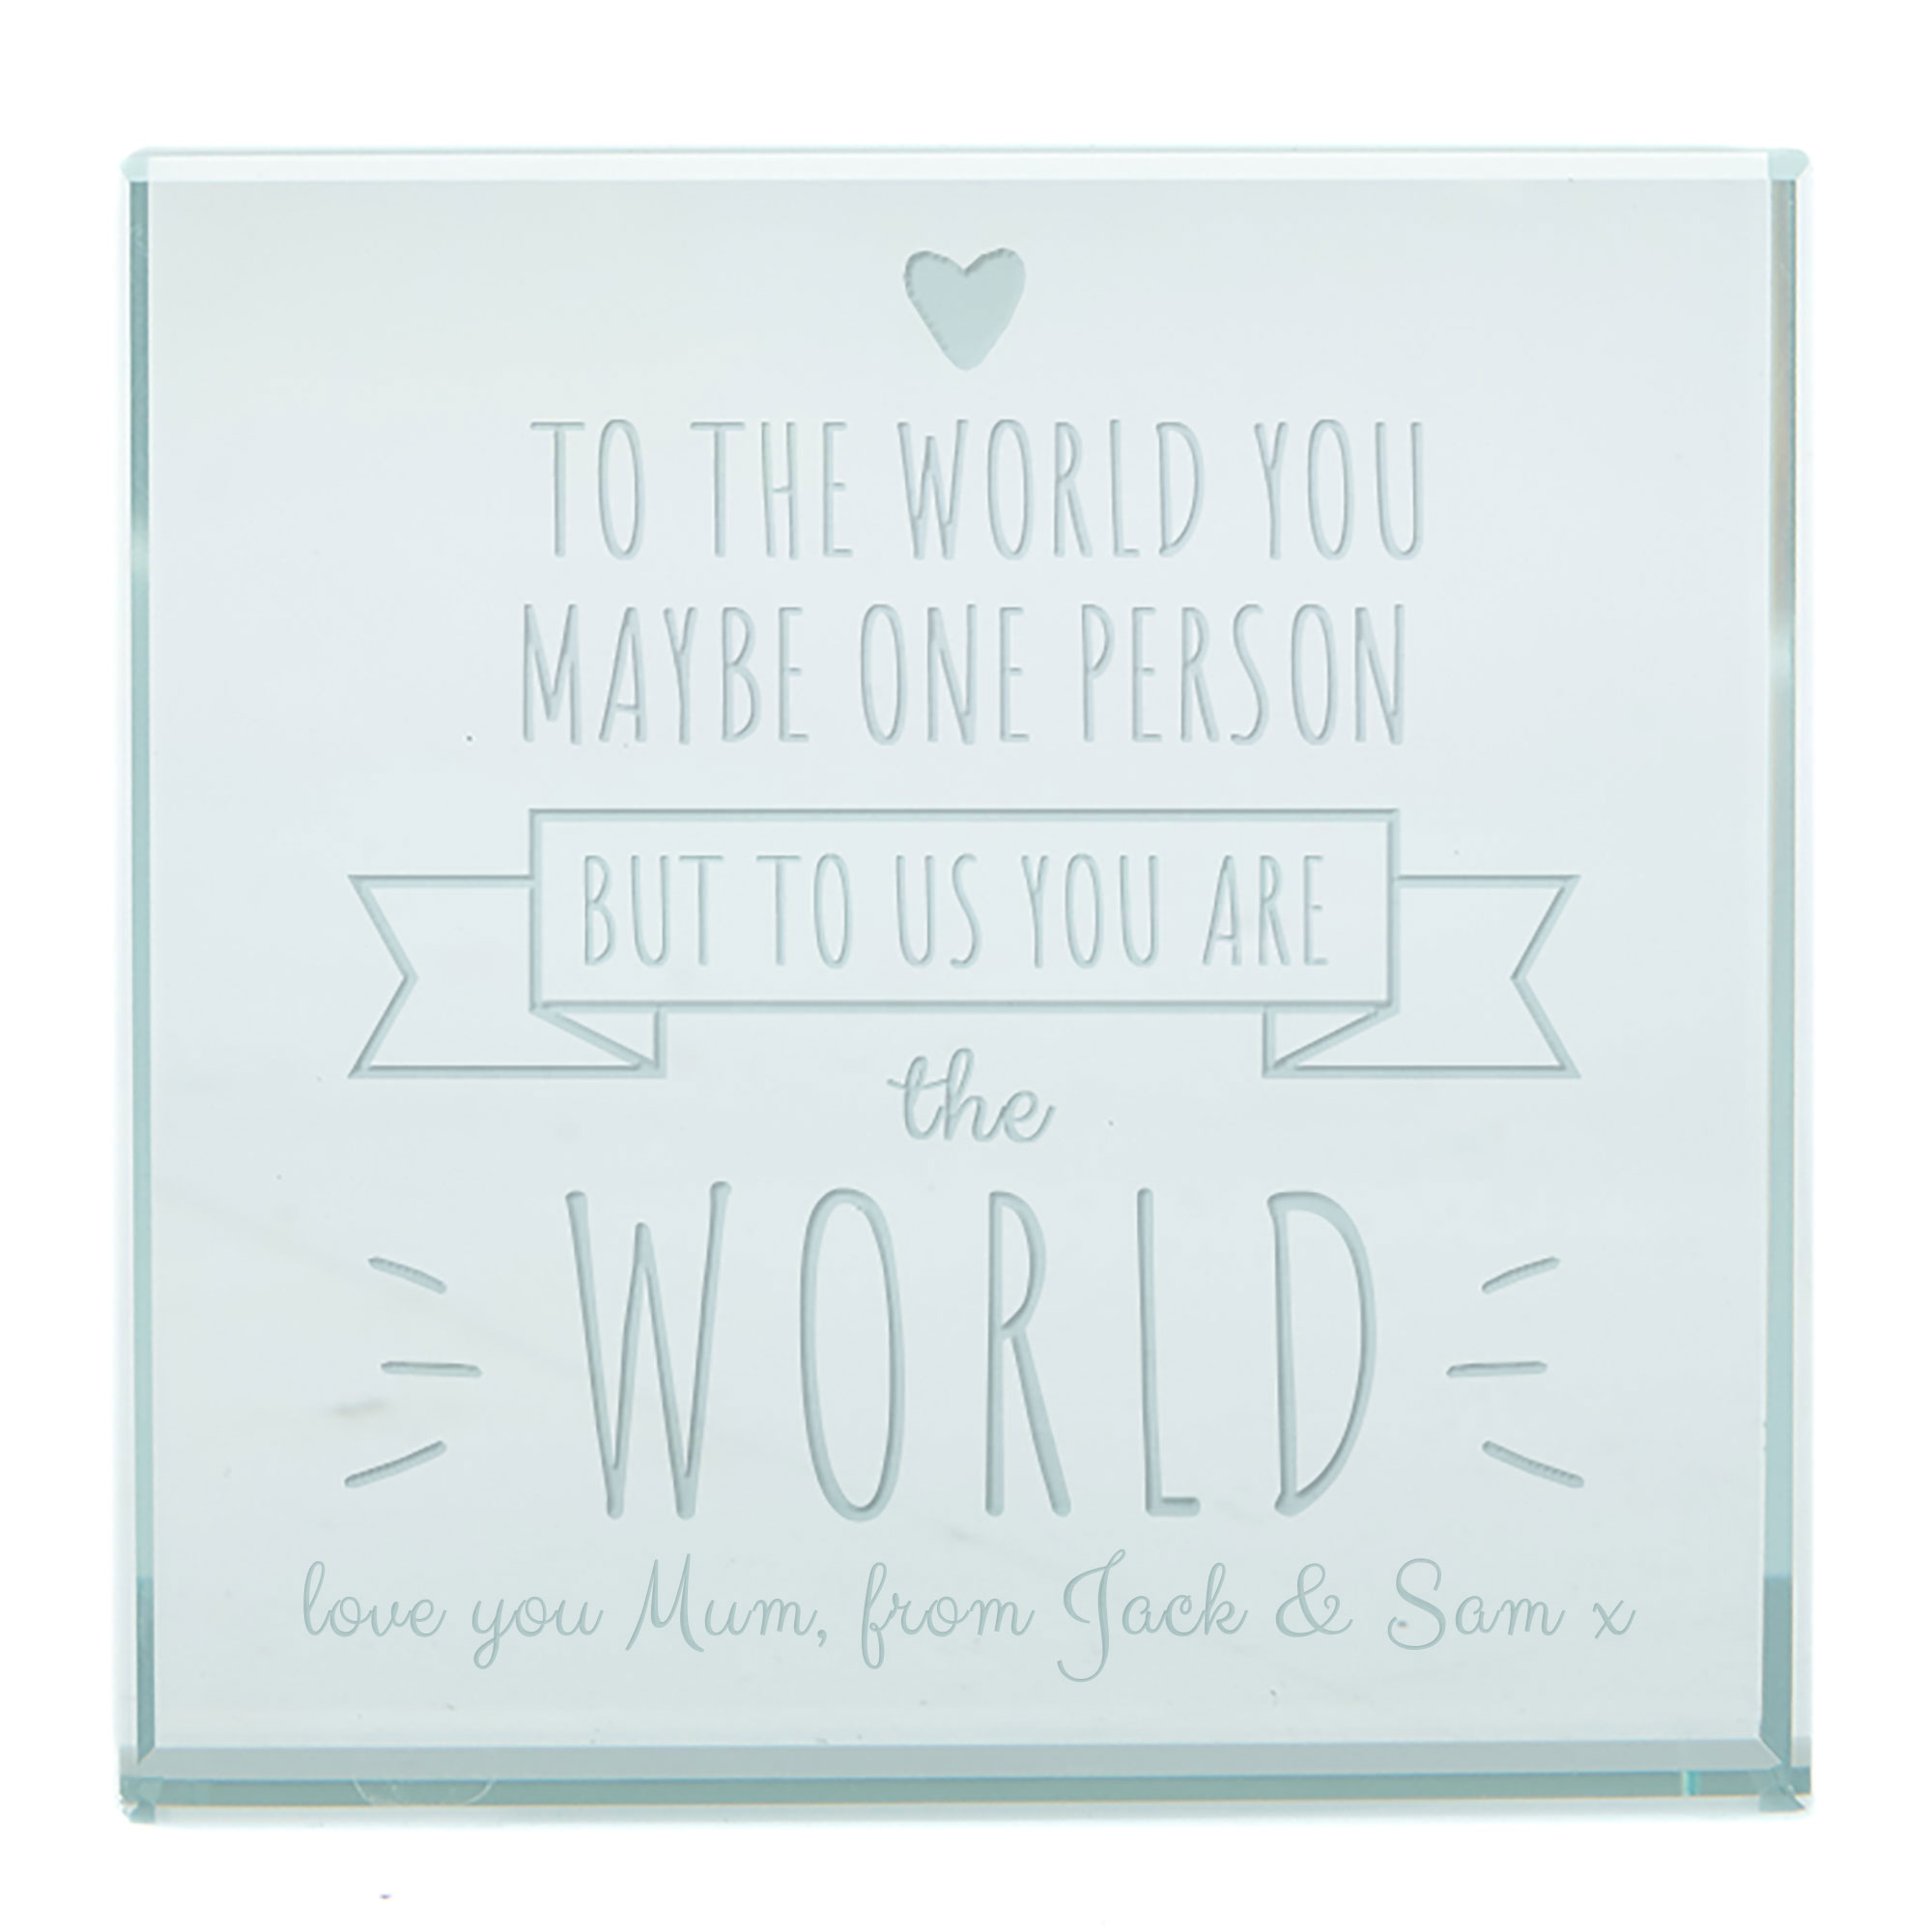 Personalised Engraved Glass Token - You Are The World